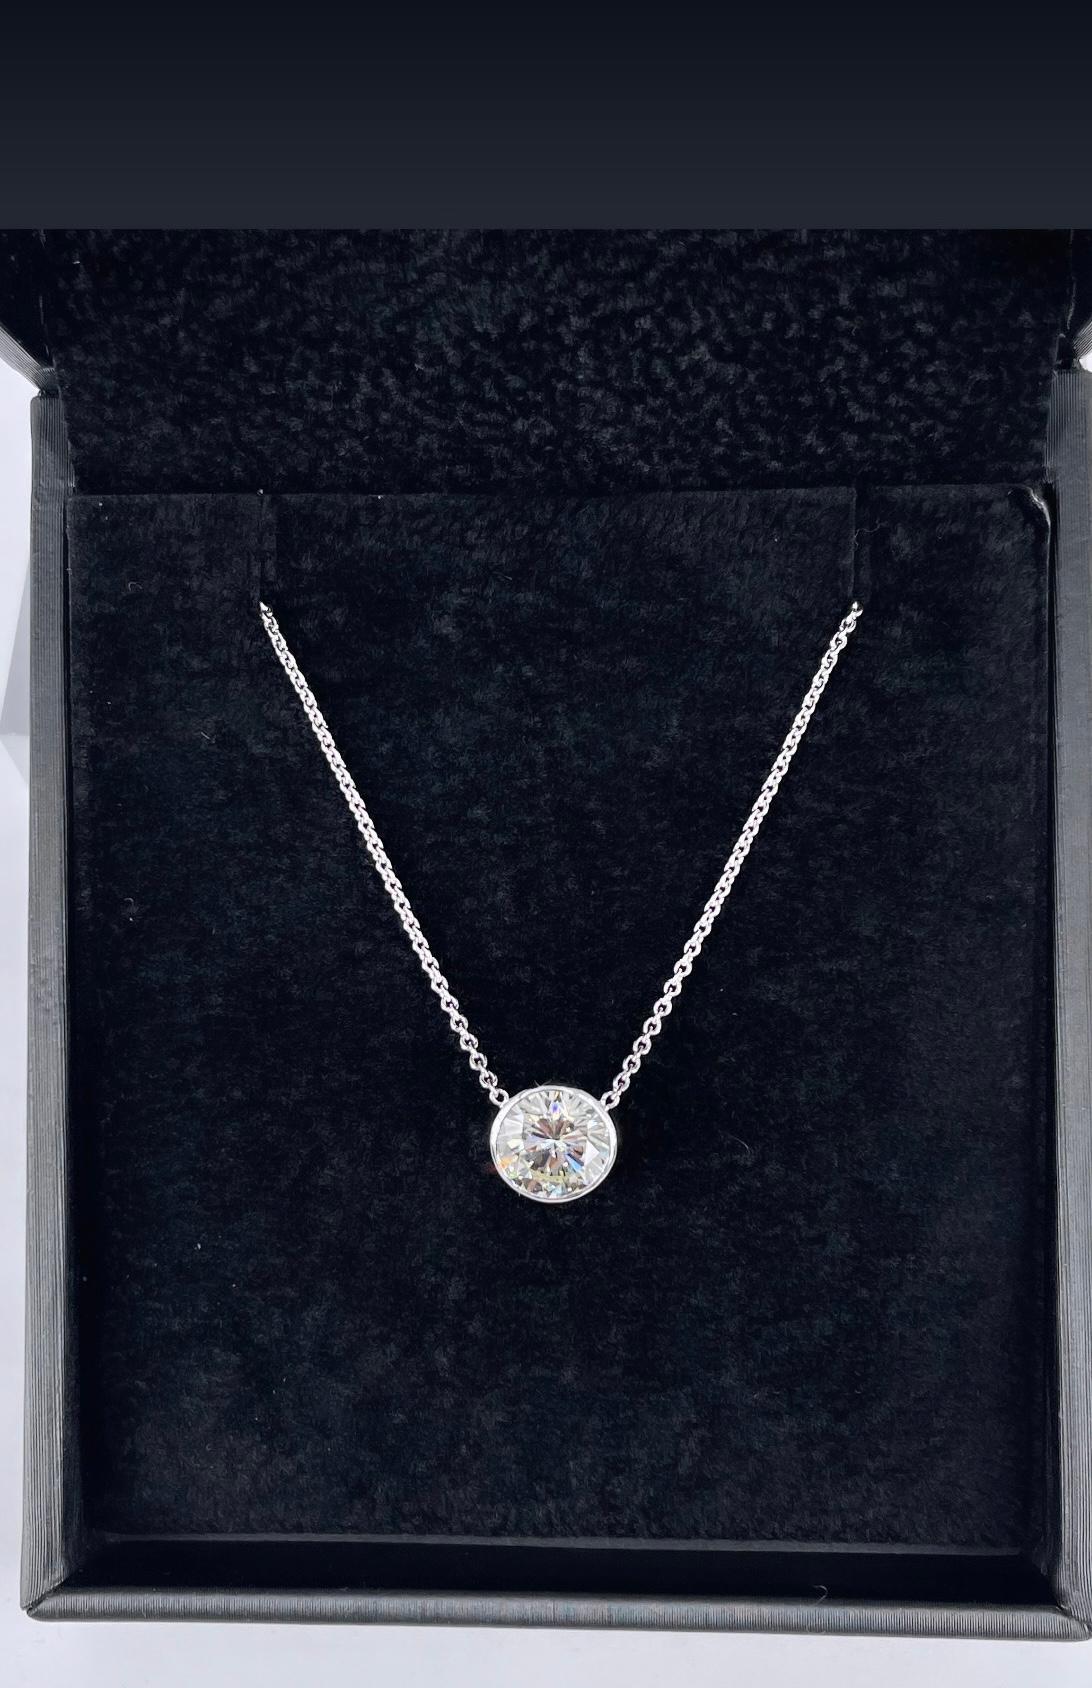 This simple and stunning diamond pendant is the perfect everyday necklace. Crafted in 18K white gold, the narrow bezel delicately frames and emphasizes the diamond. The 1.42 carat round diamond is GIA certified M color and VS2 clarity. The diamond's